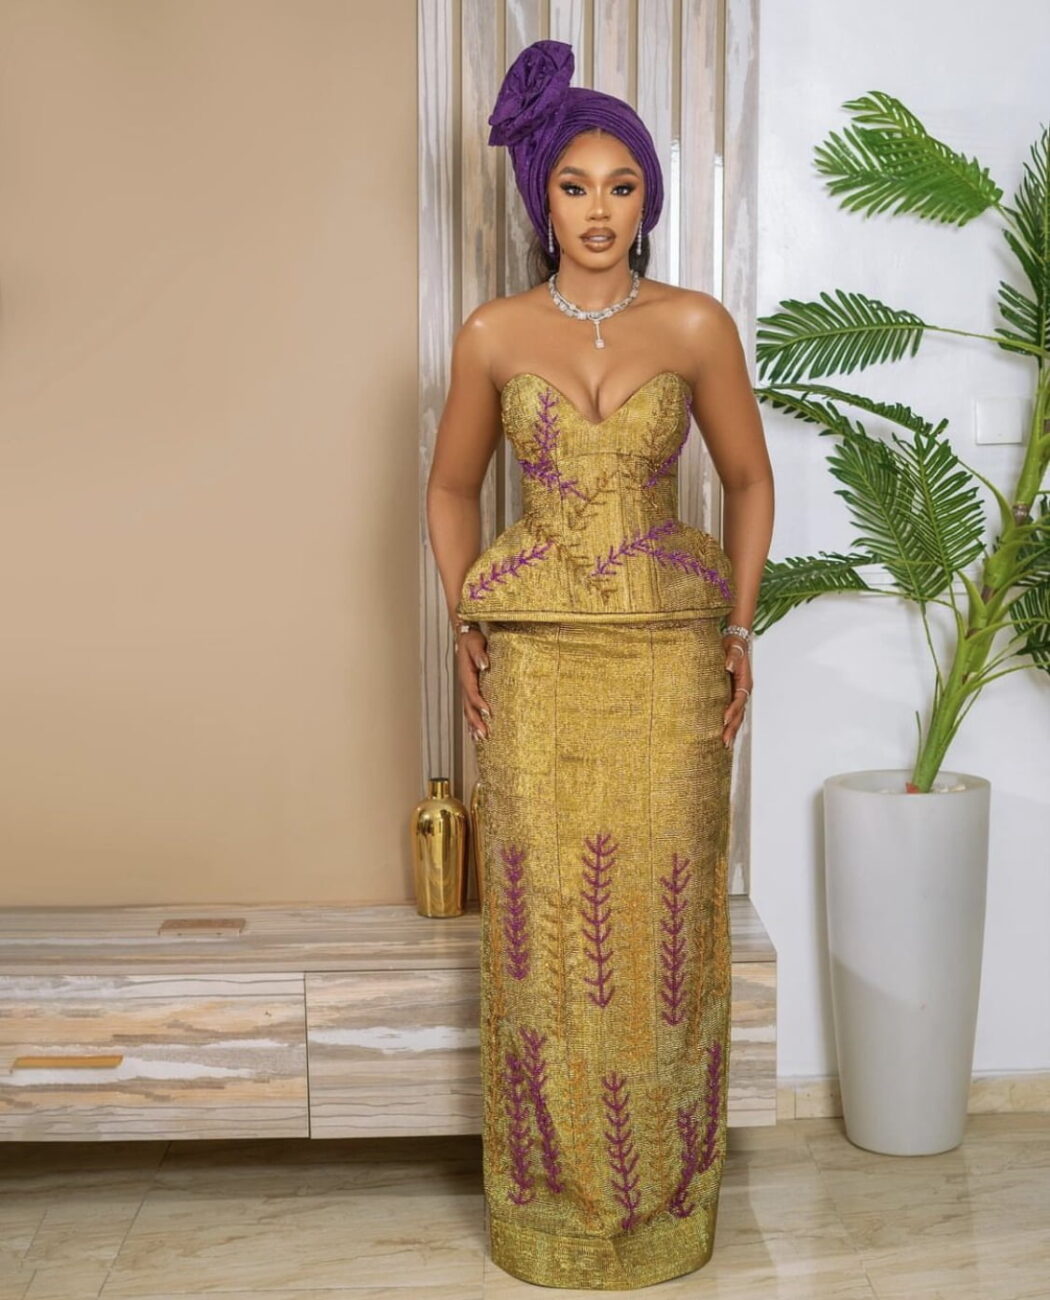 Sharon Ooja in a stunning outfit at Kunle Remi's wedding.